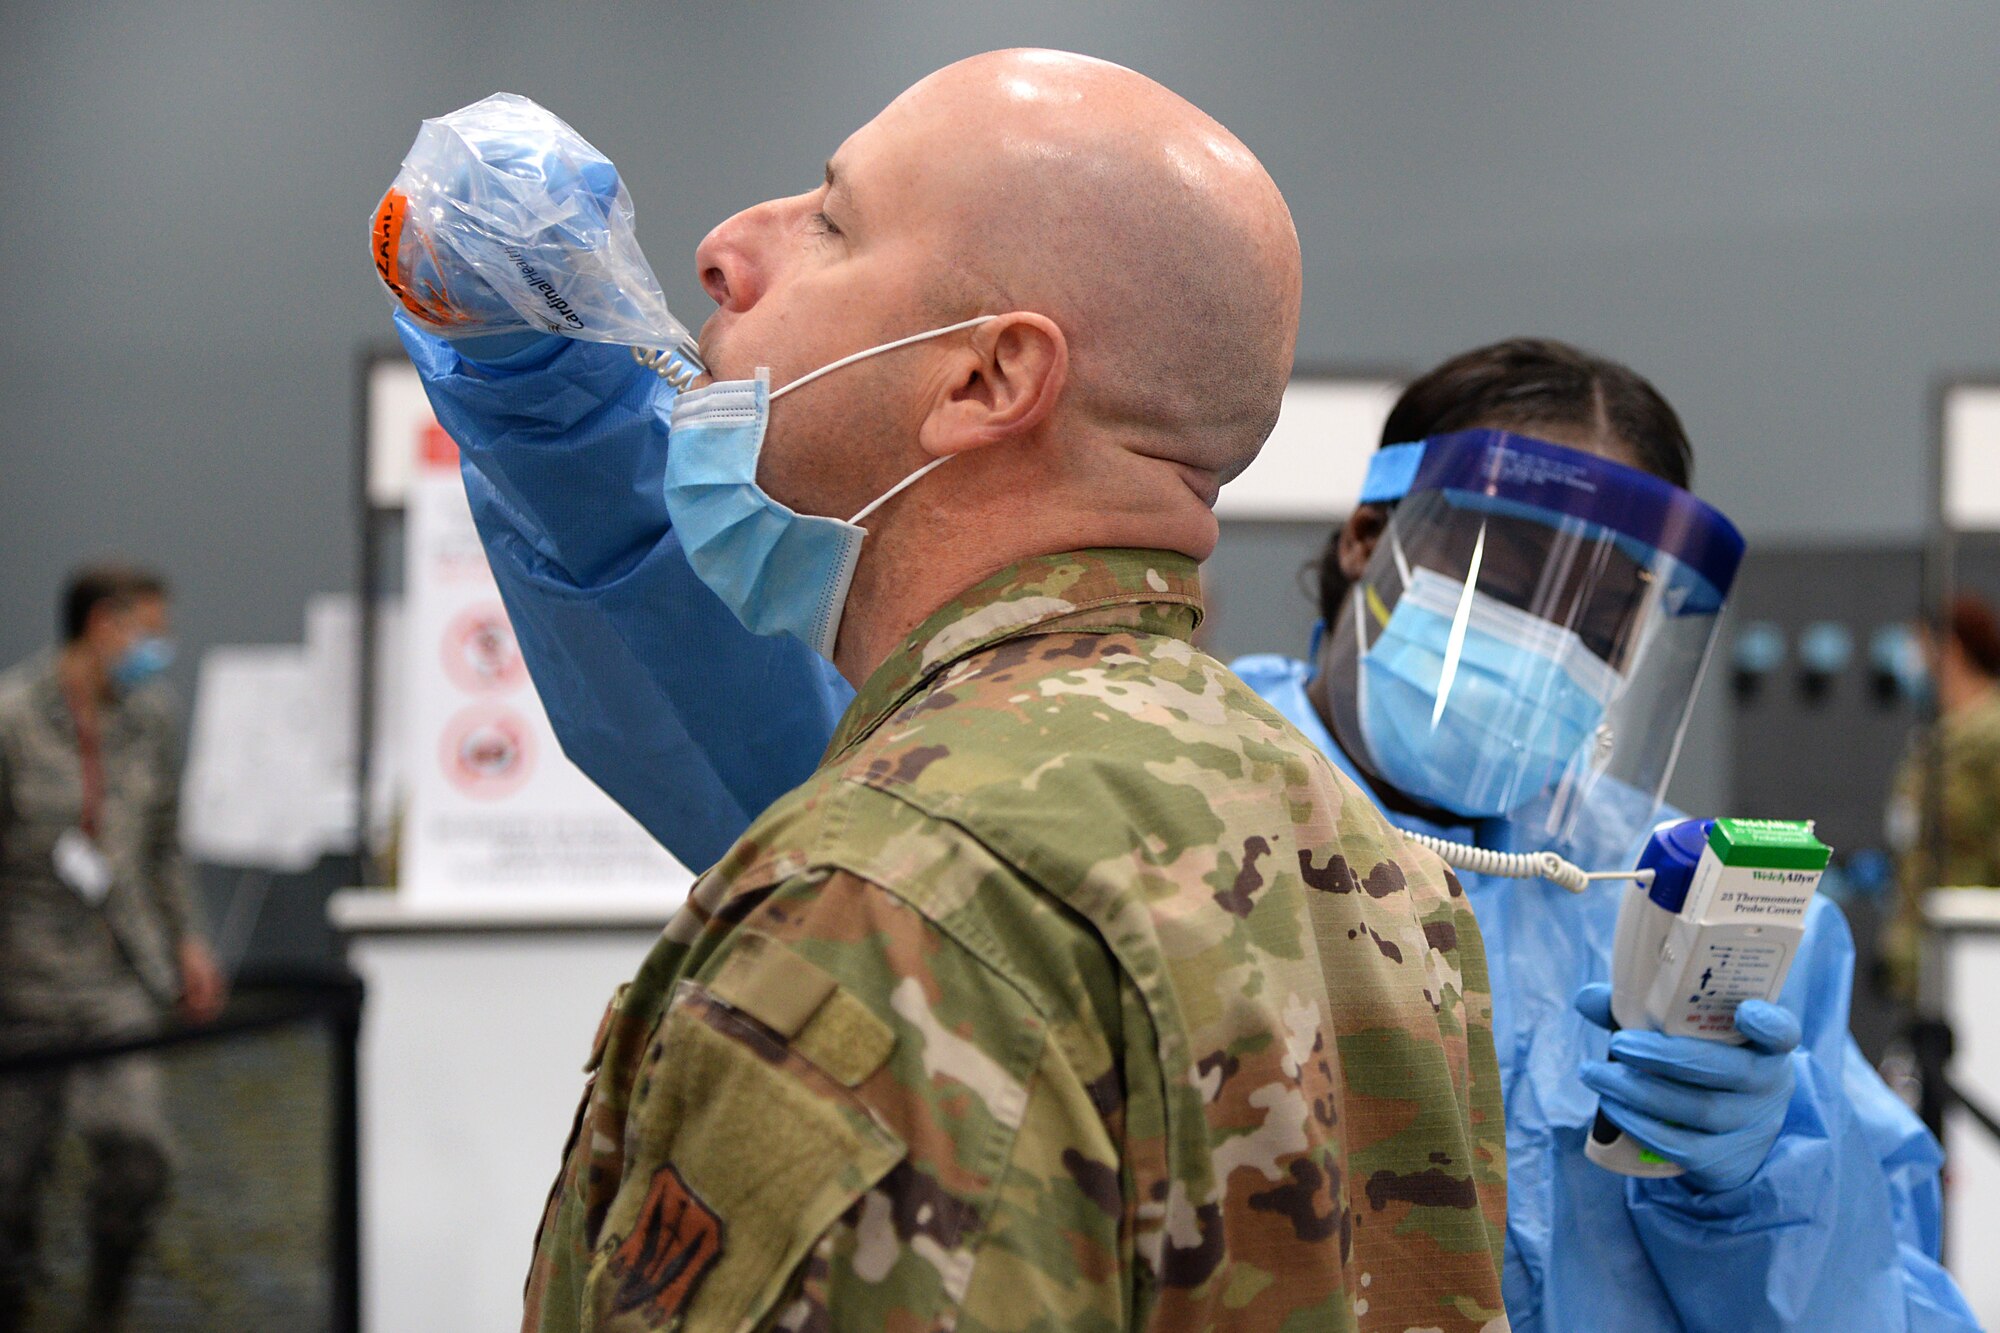 NJ National Guardsmen Operate at Federal Medical Station in Secaucus